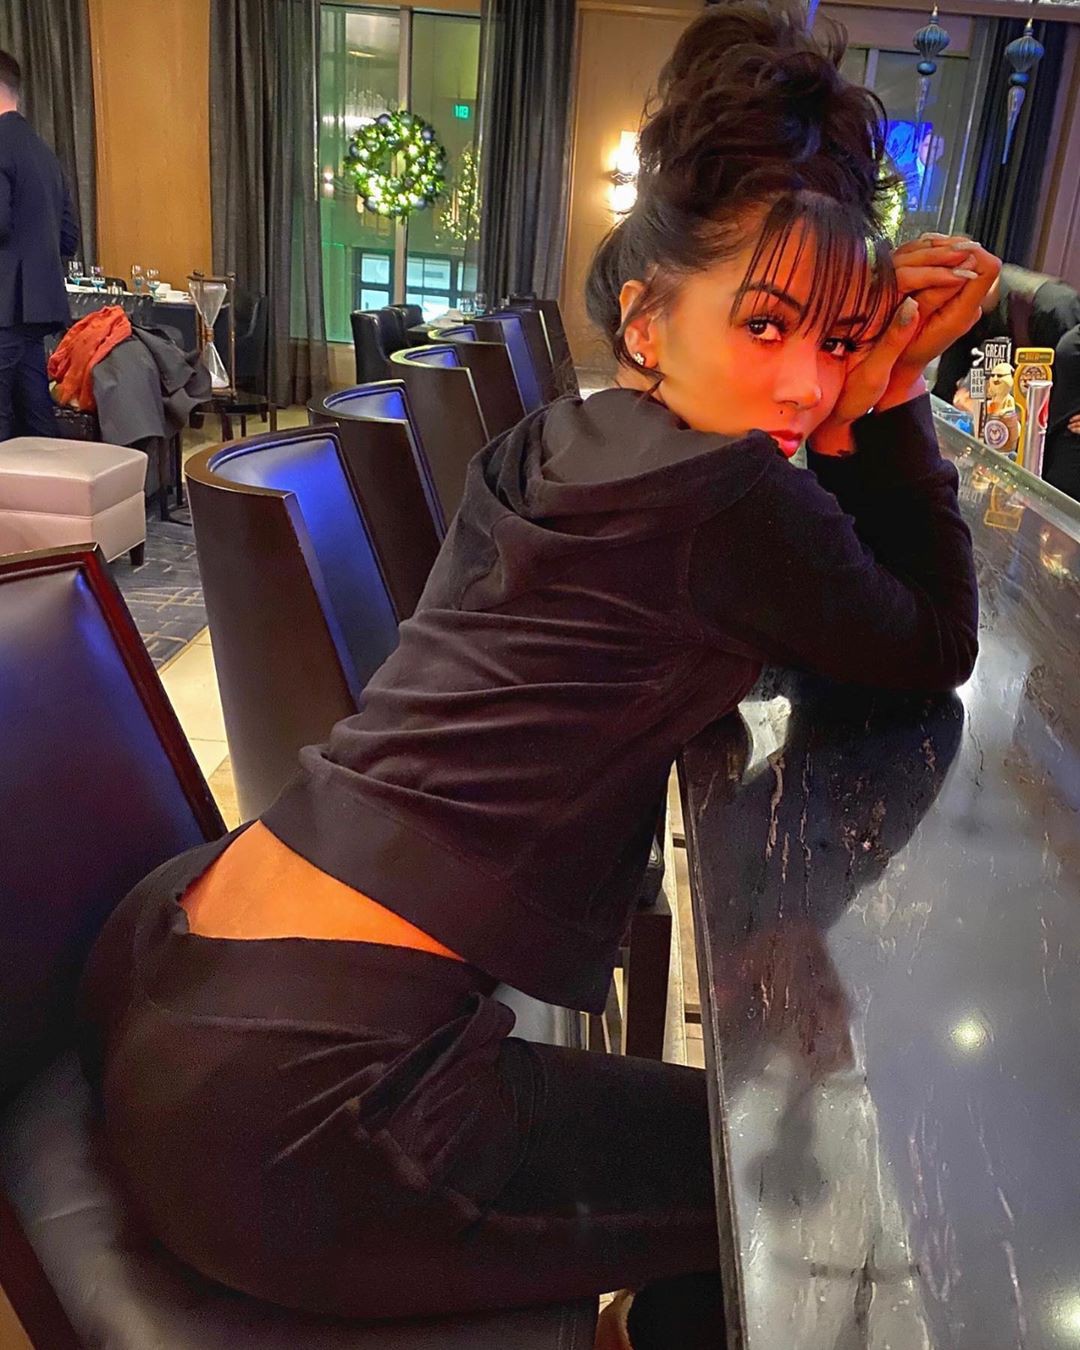 Brittany Renner trousers outfit ideas, legs pic, enjoying her day: Trousers,  Fictional Character  